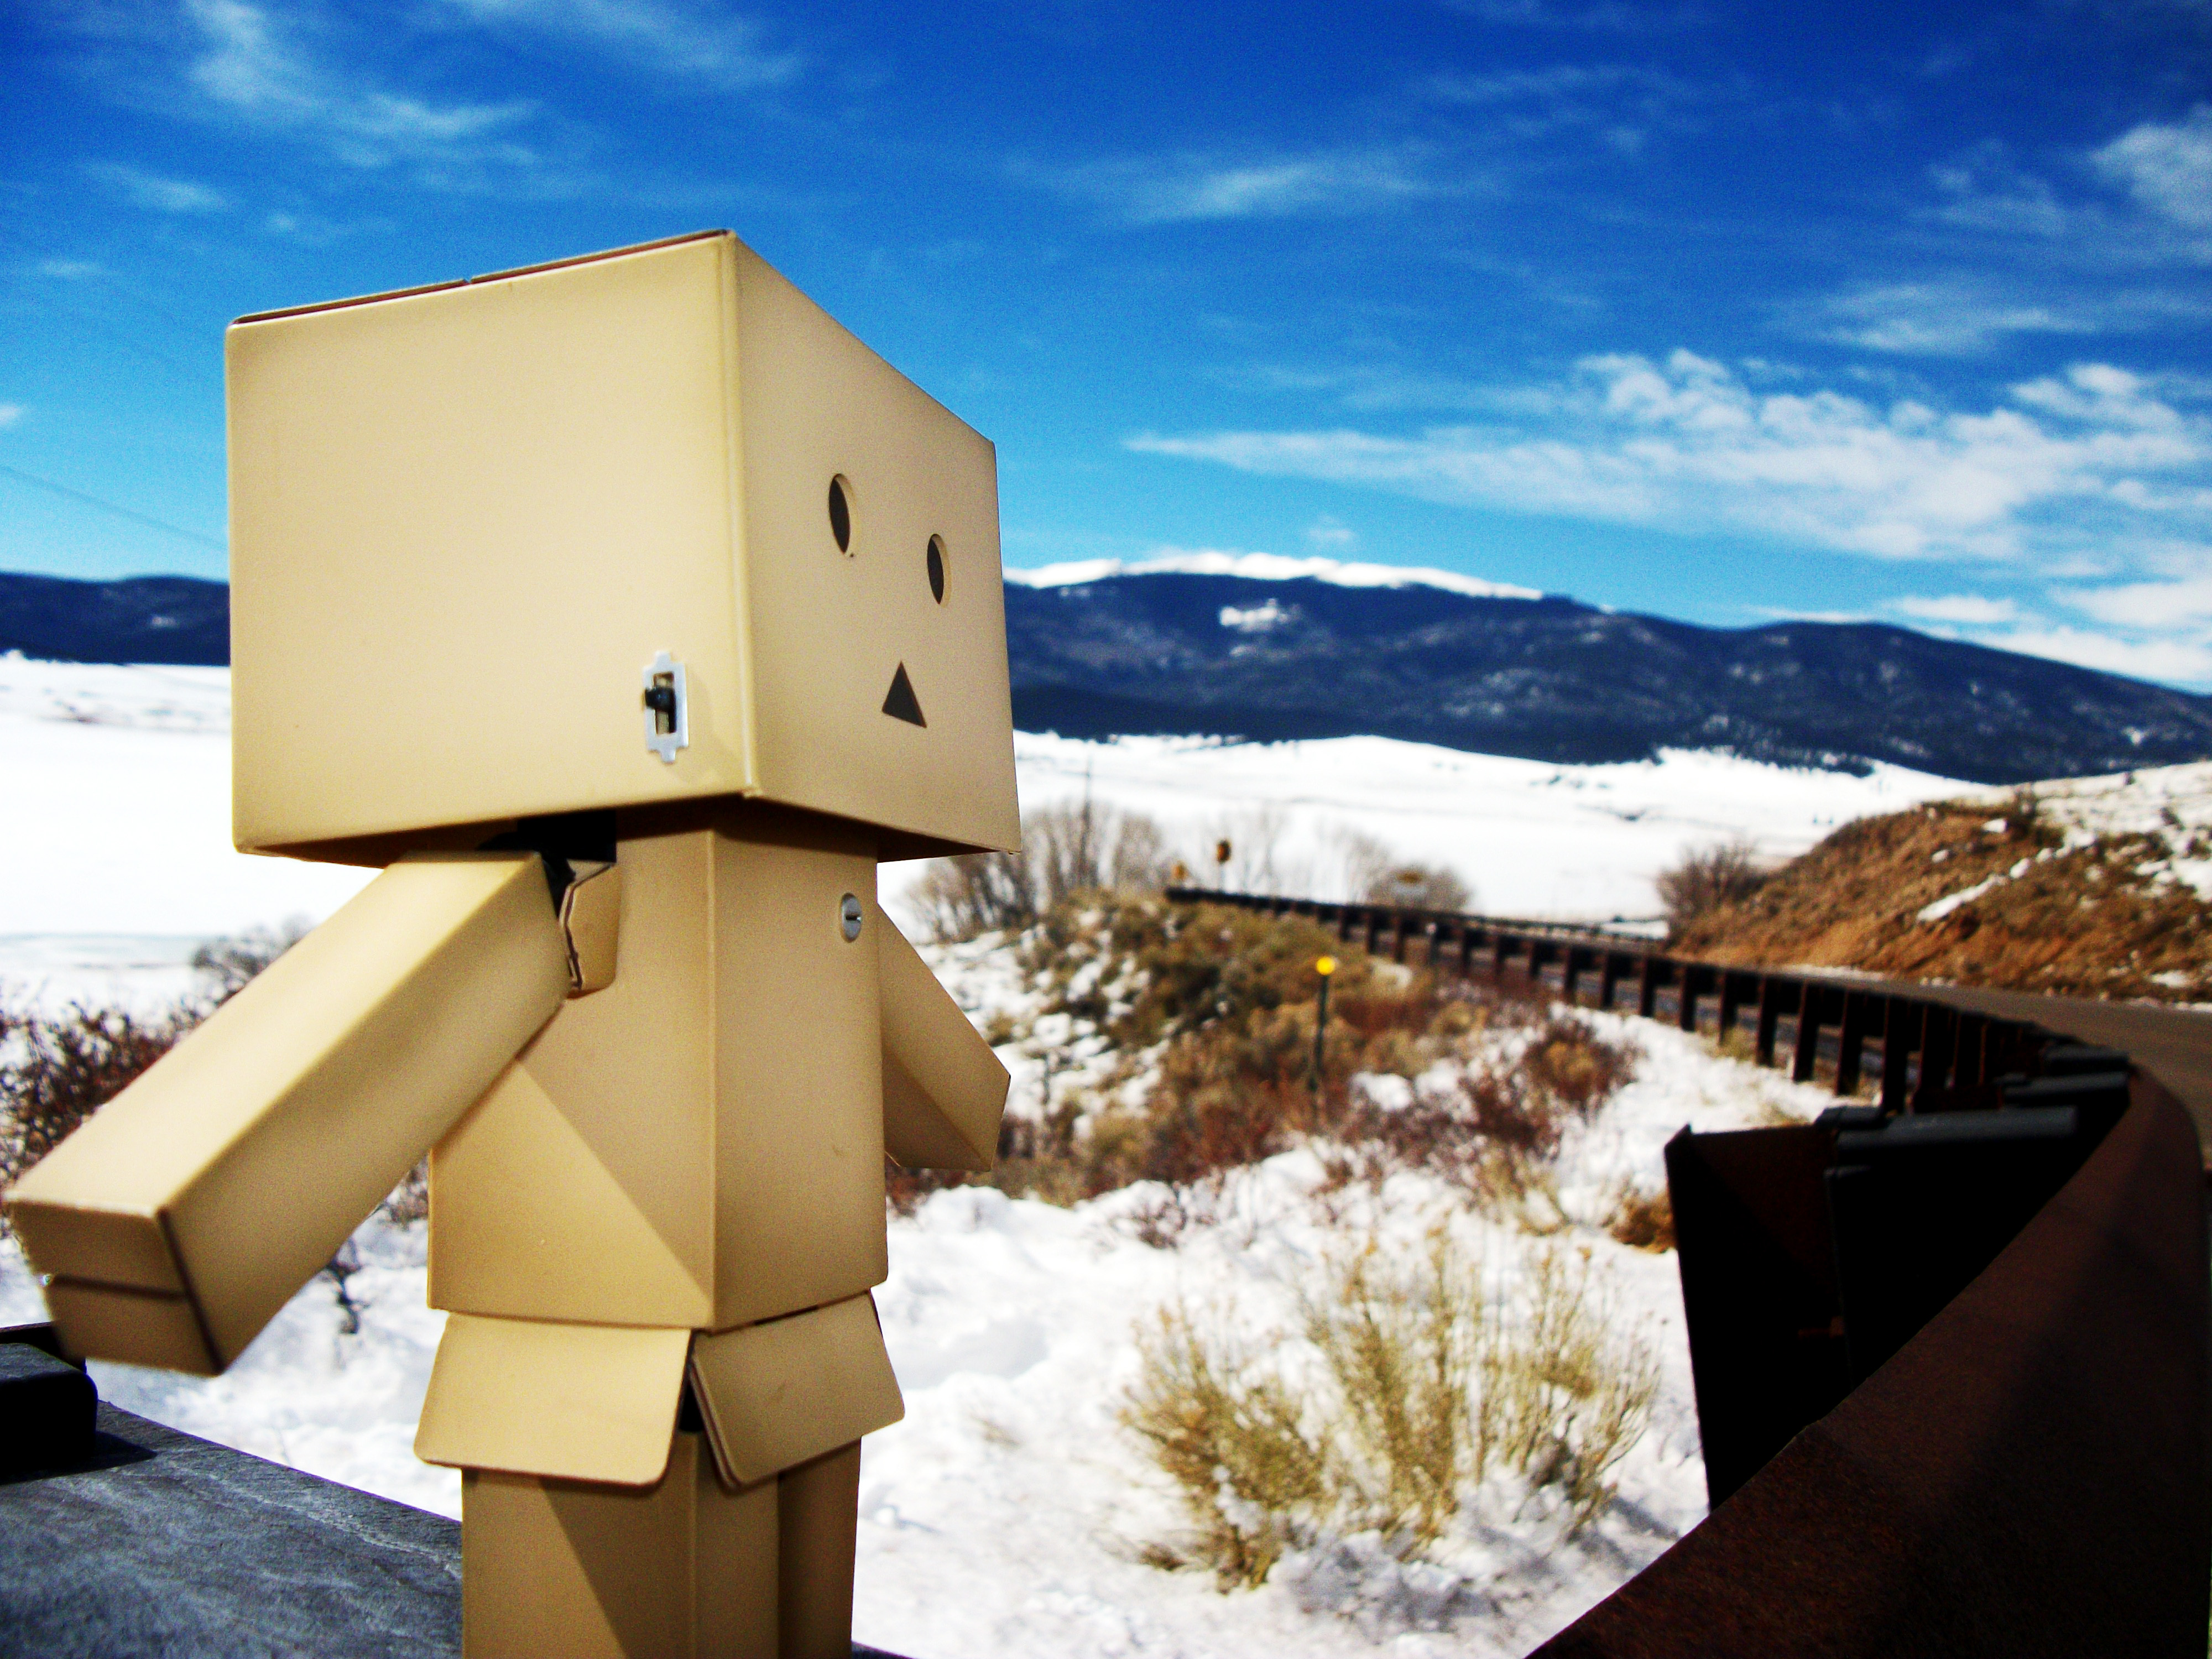 Danbo Wallpaper - Danbo Wallpaper Hd , HD Wallpaper & Backgrounds